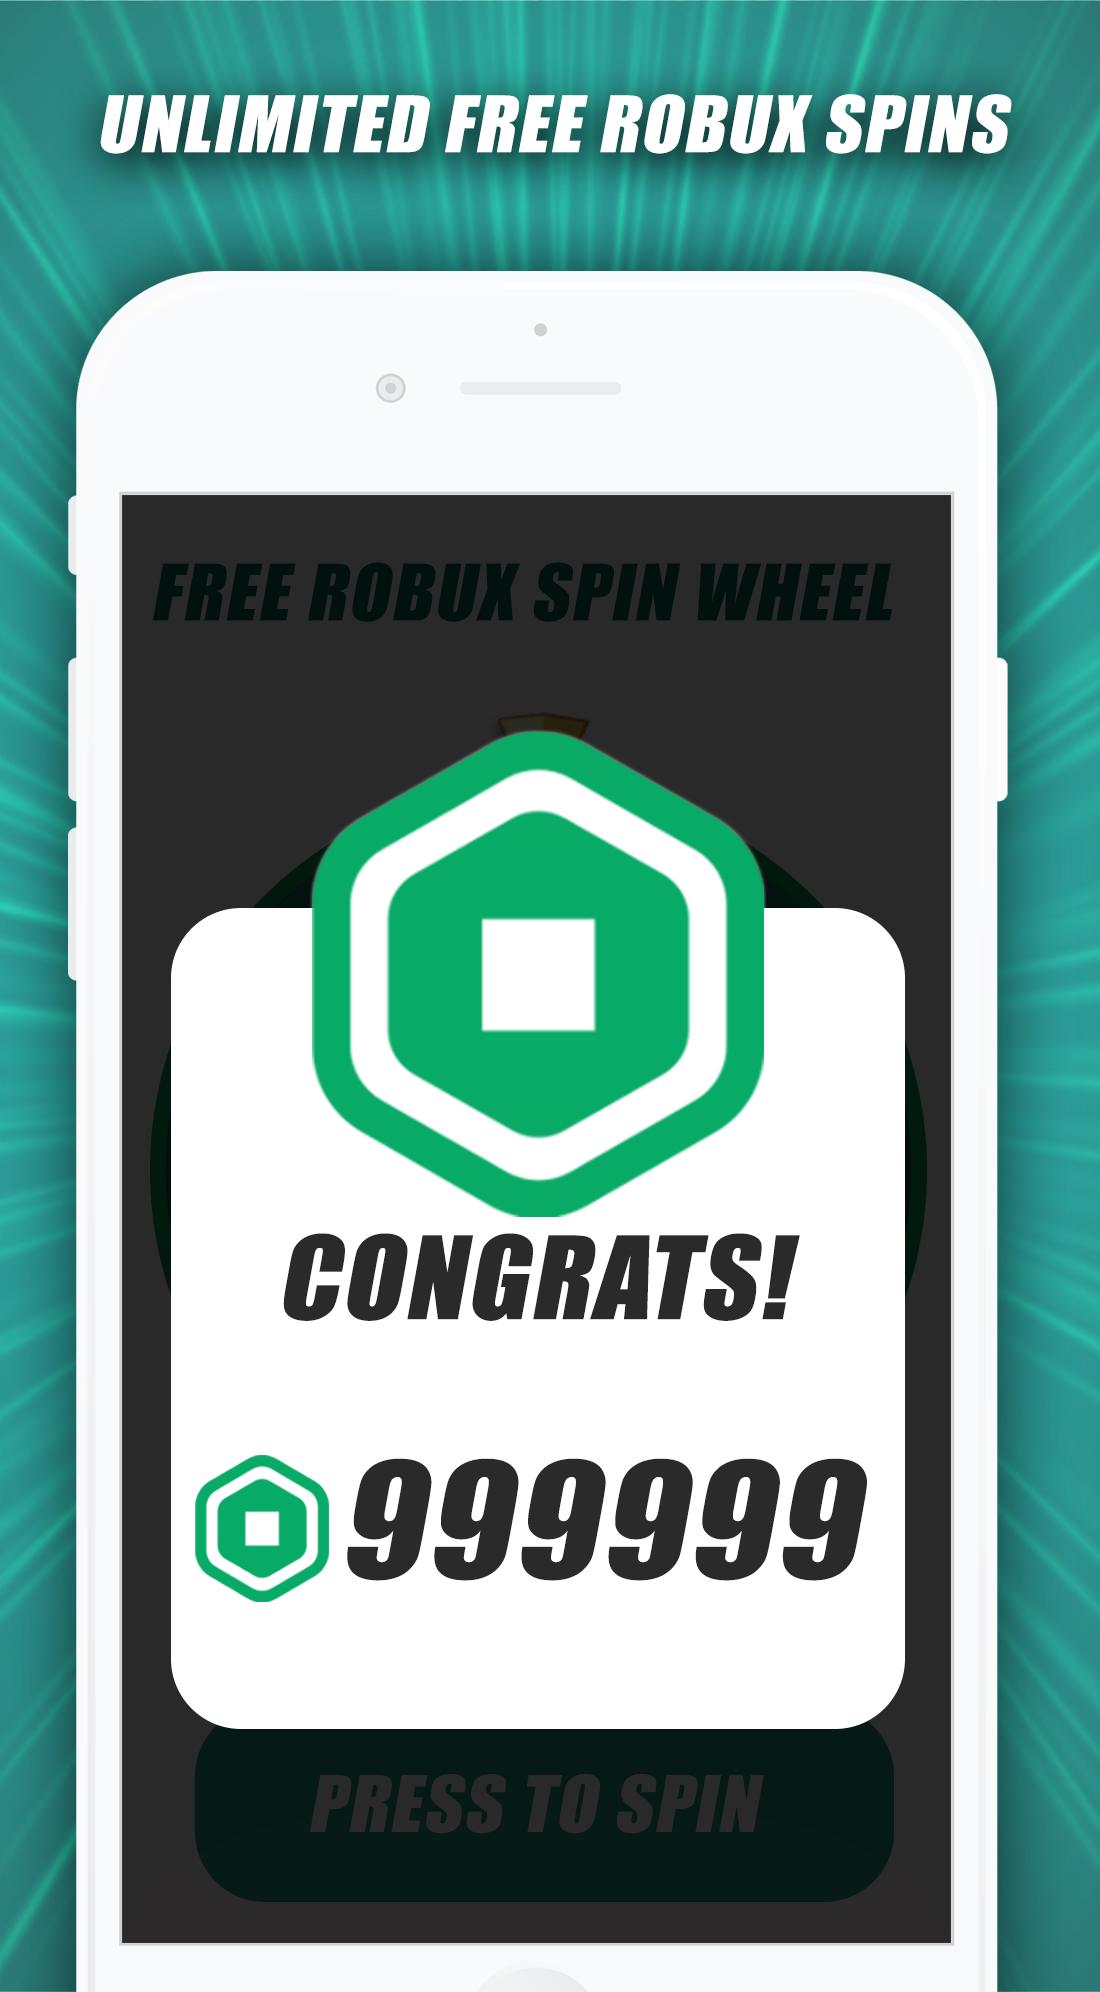 Free Robux Spin Wheel And Rbx Counter For Rblox For Android Apk Download - roblox free robux spin wheel